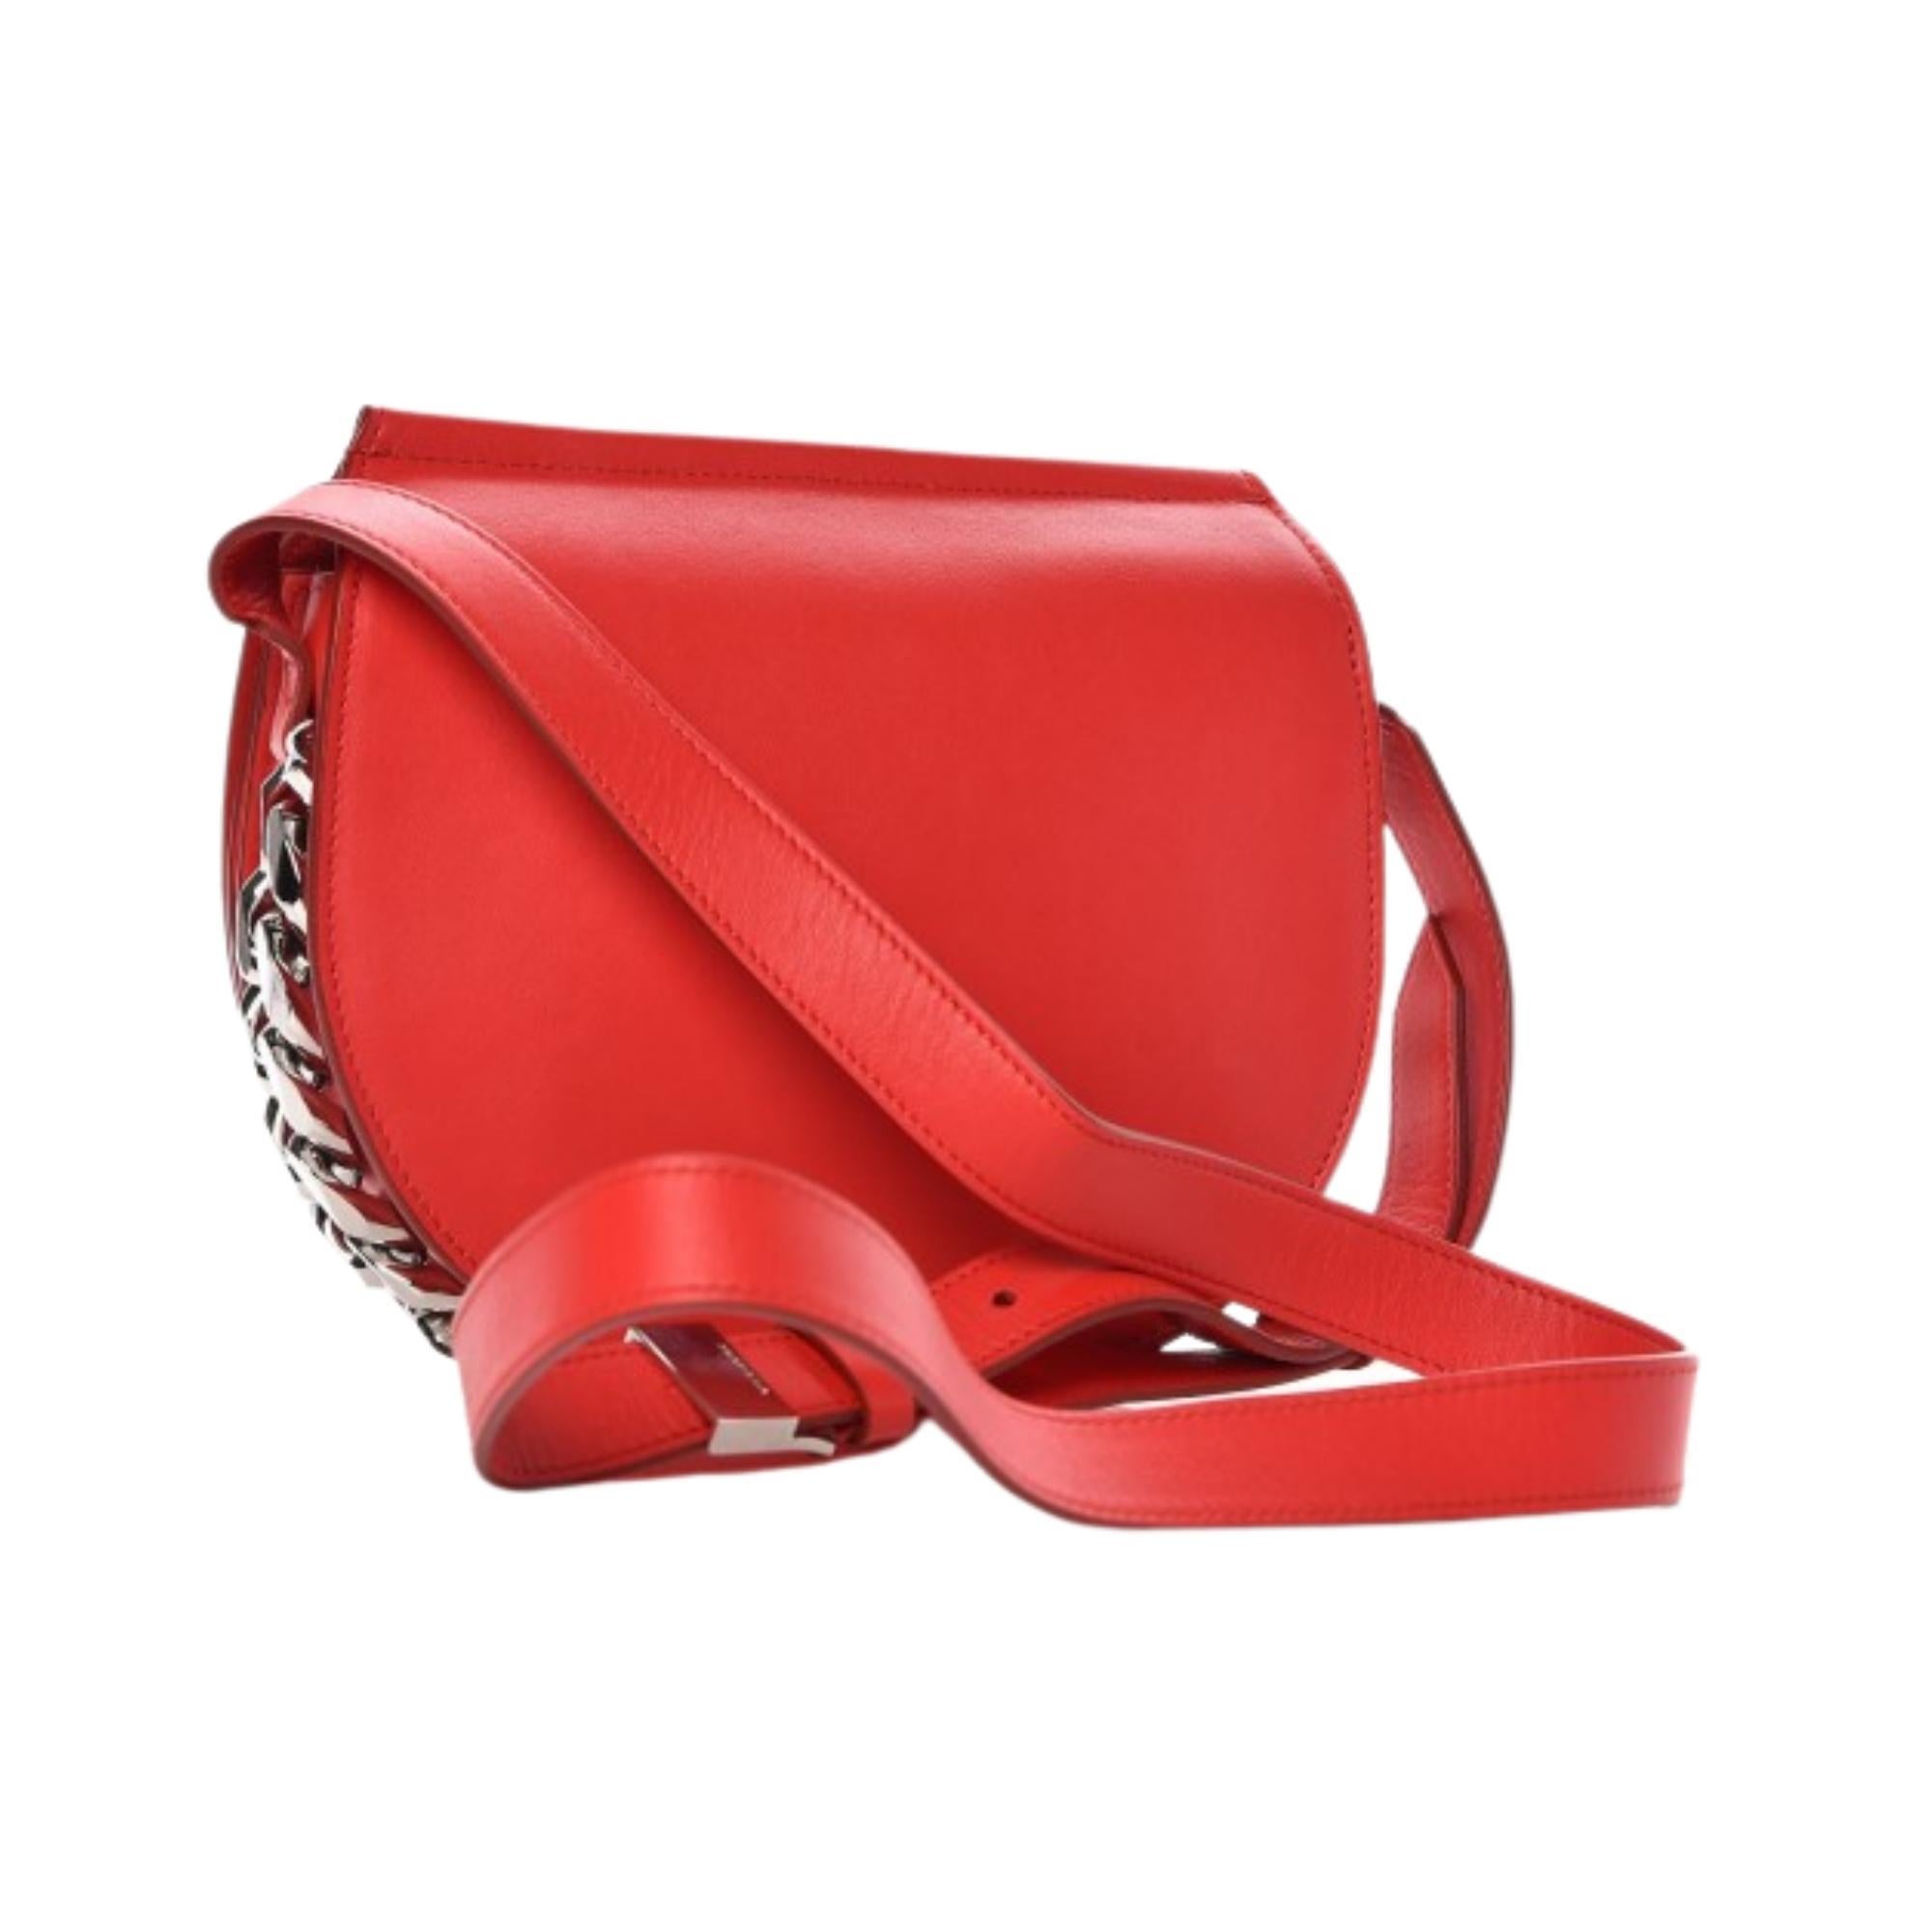 This unique saddle bag from Givenchy is crafted in red calfskin leather with polished silver chains along the sides and bottom. The bag also features a shoulder strap and a flap that has a magnetic snap closure which opens to a beige interior with a